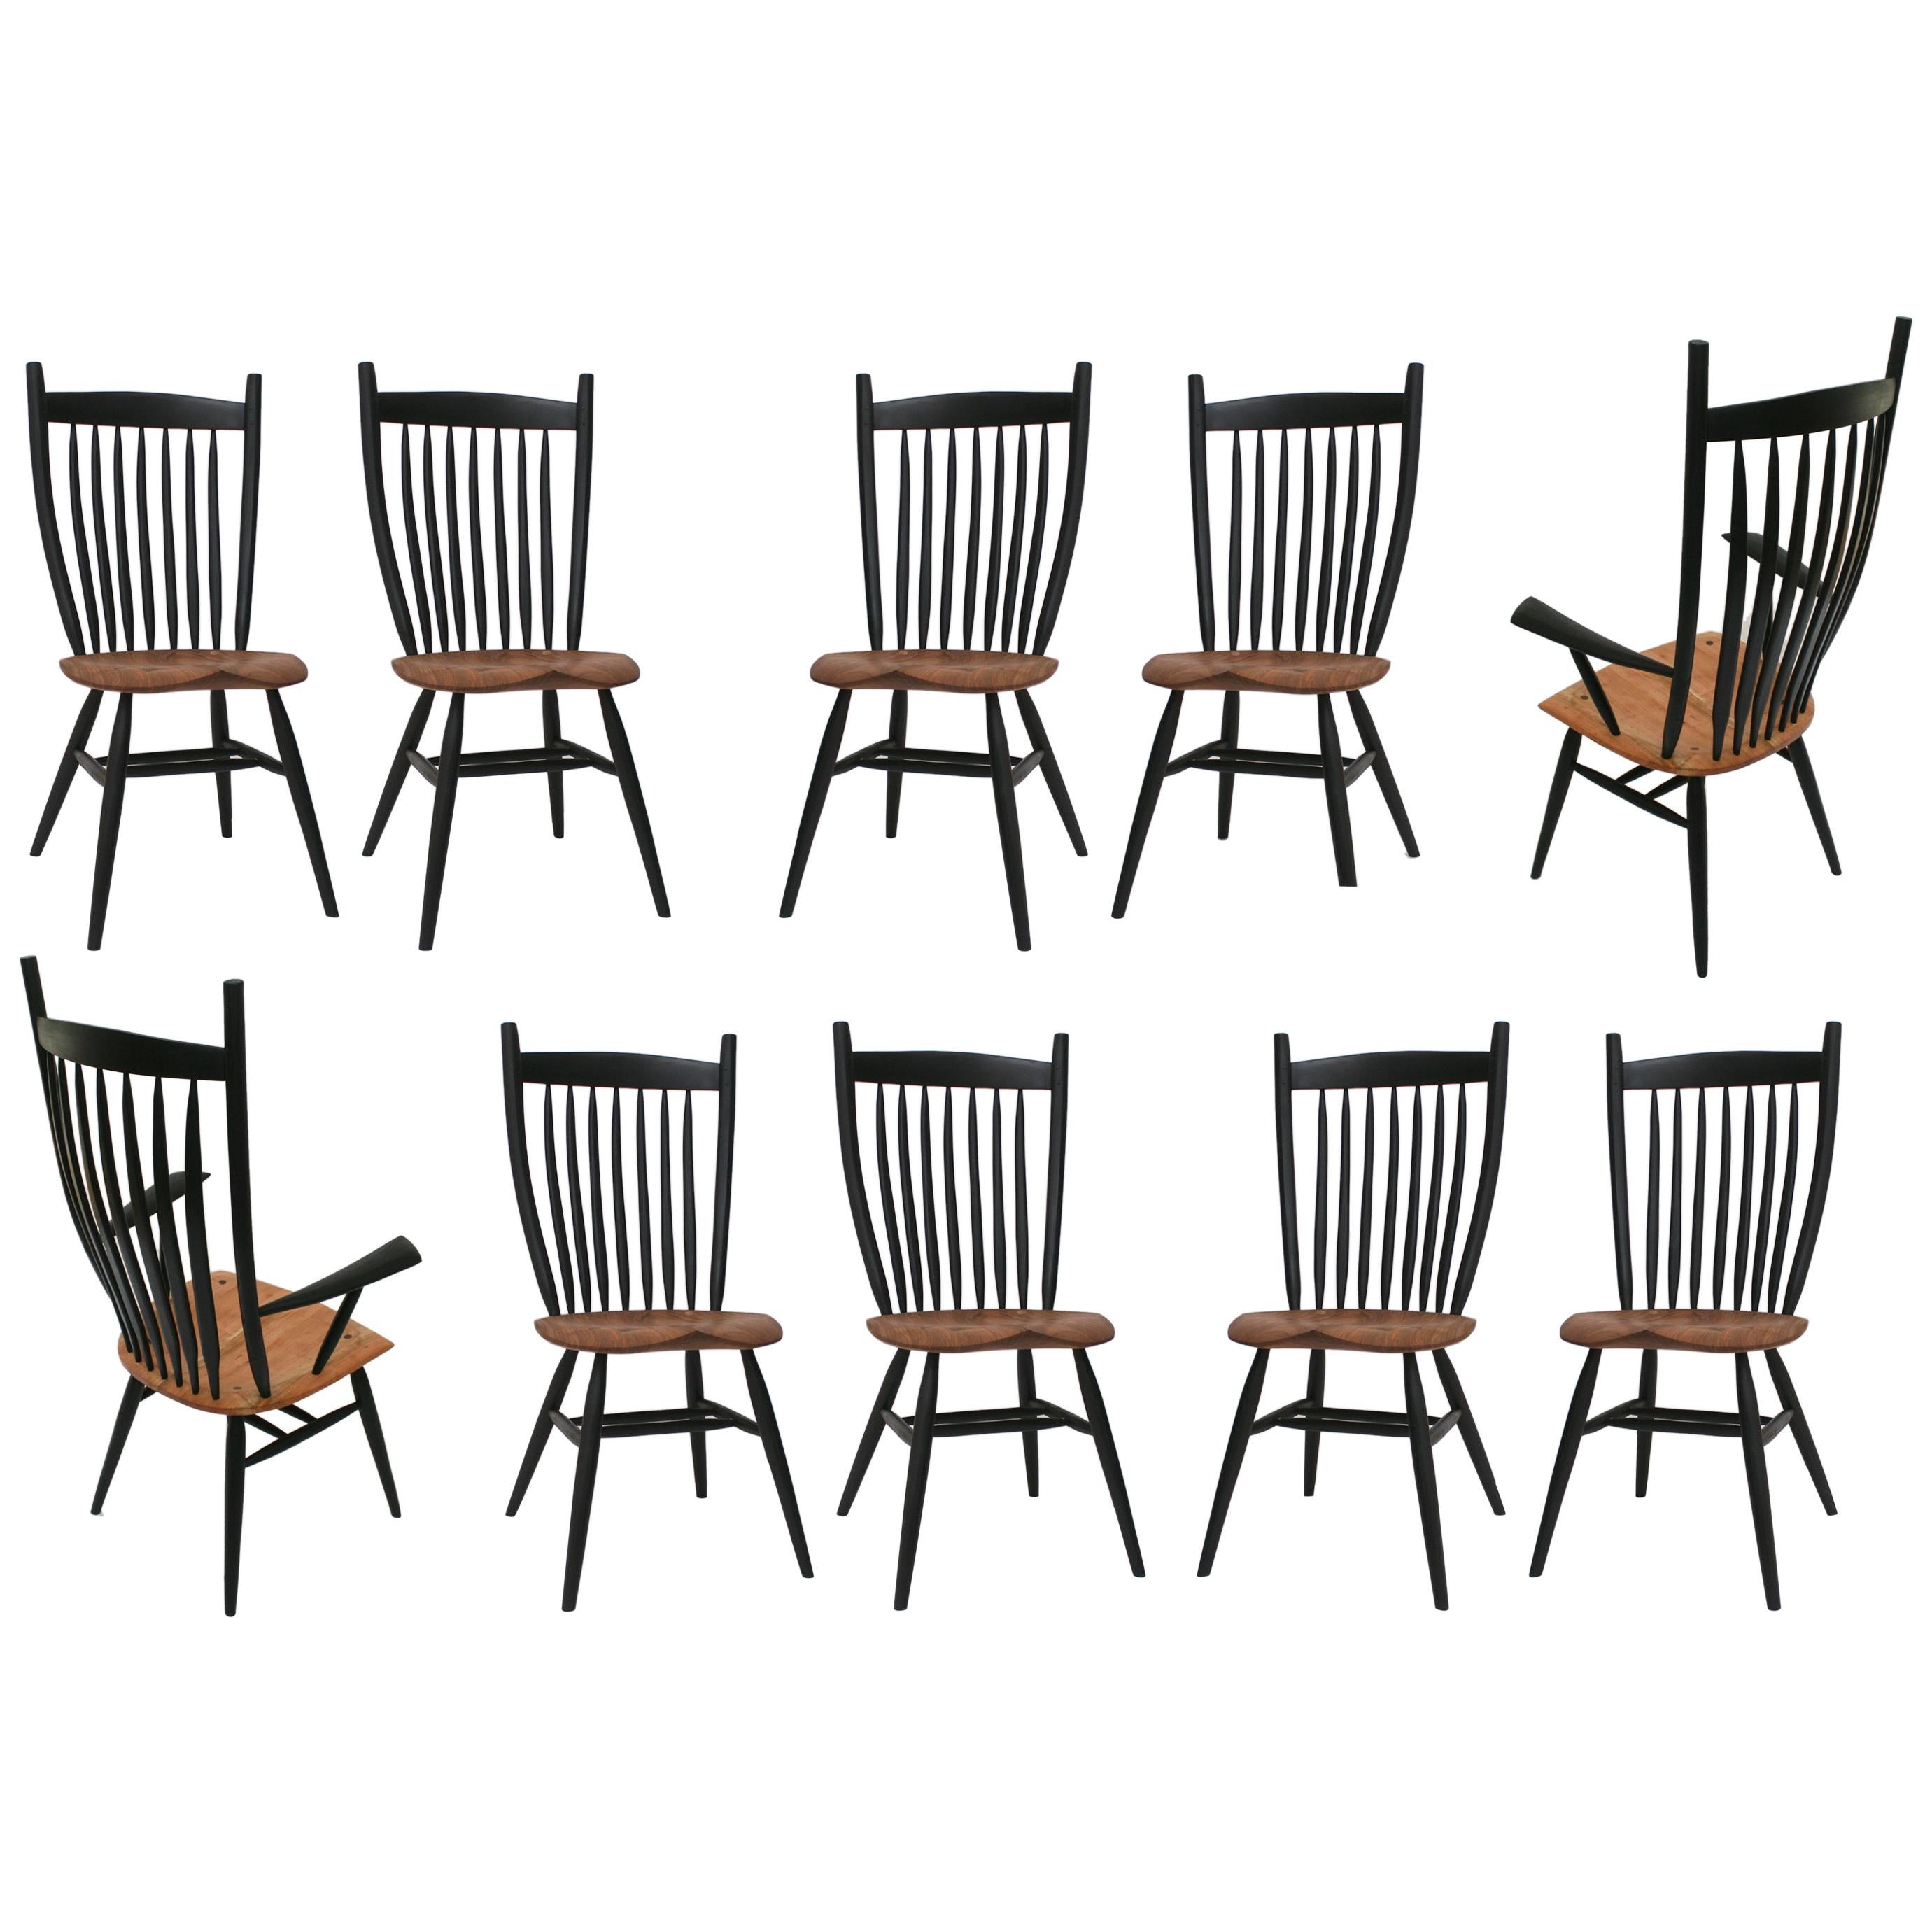 Set of 10 Handcrafted Studio Bent Chairs by Fabian Fischer, Germany, 2023